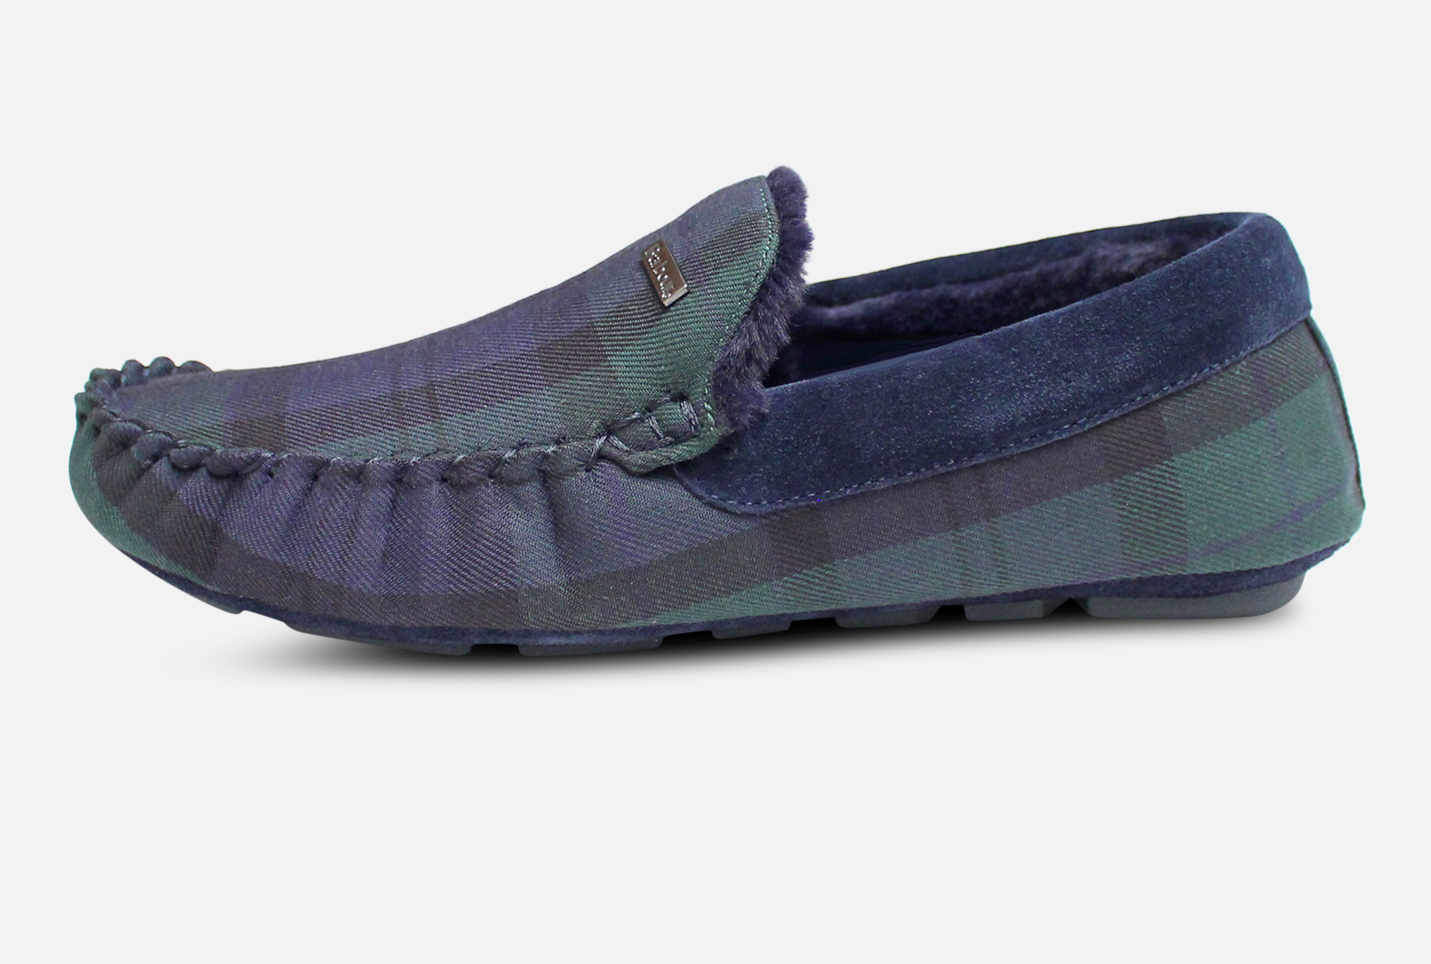 barbour monty suede slippers navy